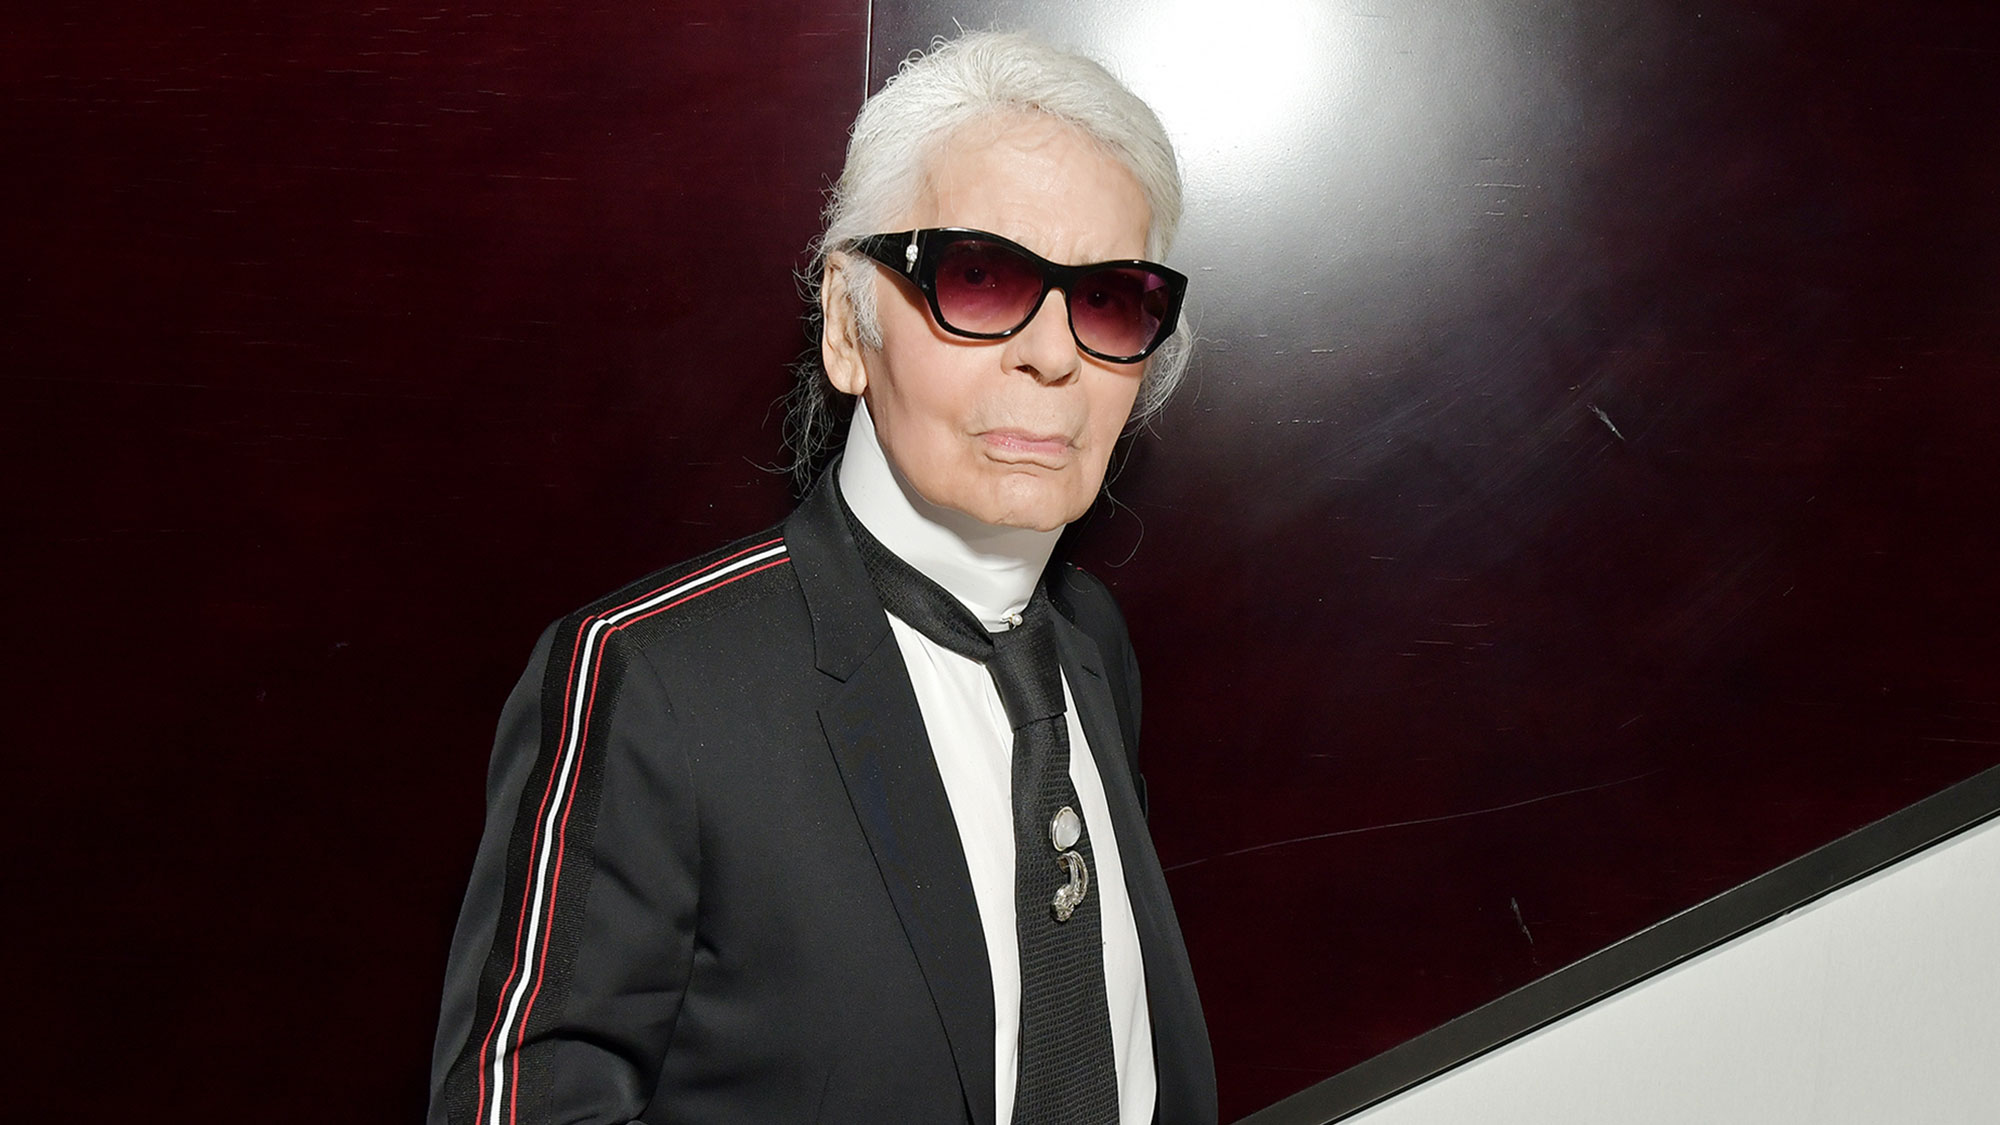 Celeb Weight Loss Tips: Karl Lagerfeld's Slimming Words of Fashion